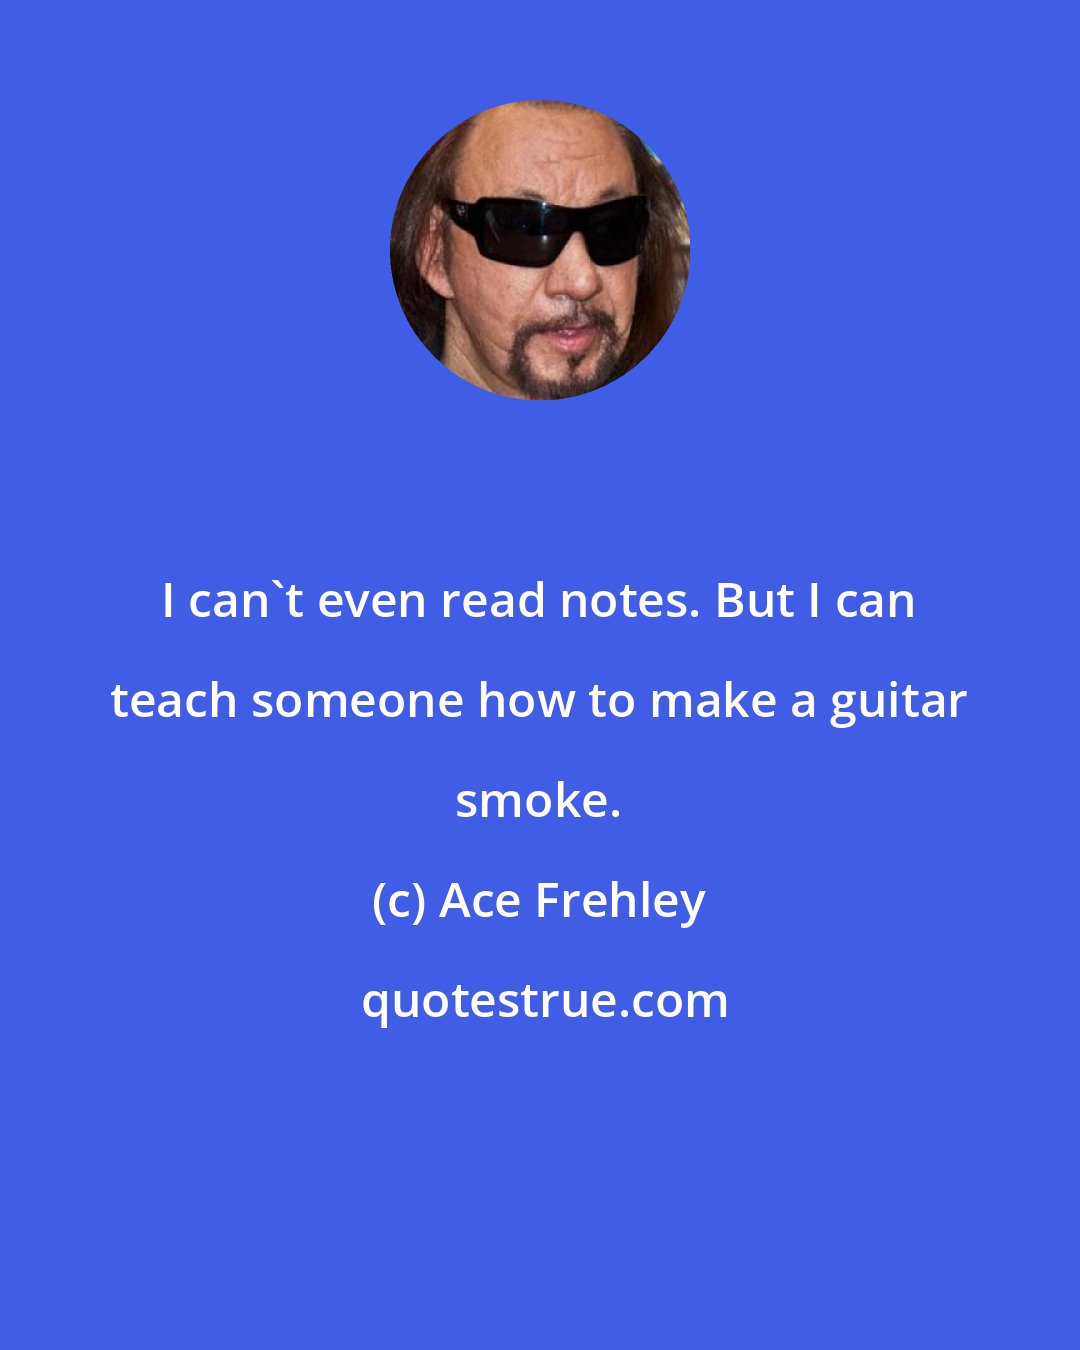 Ace Frehley: I can't even read notes. But I can teach someone how to make a guitar smoke.